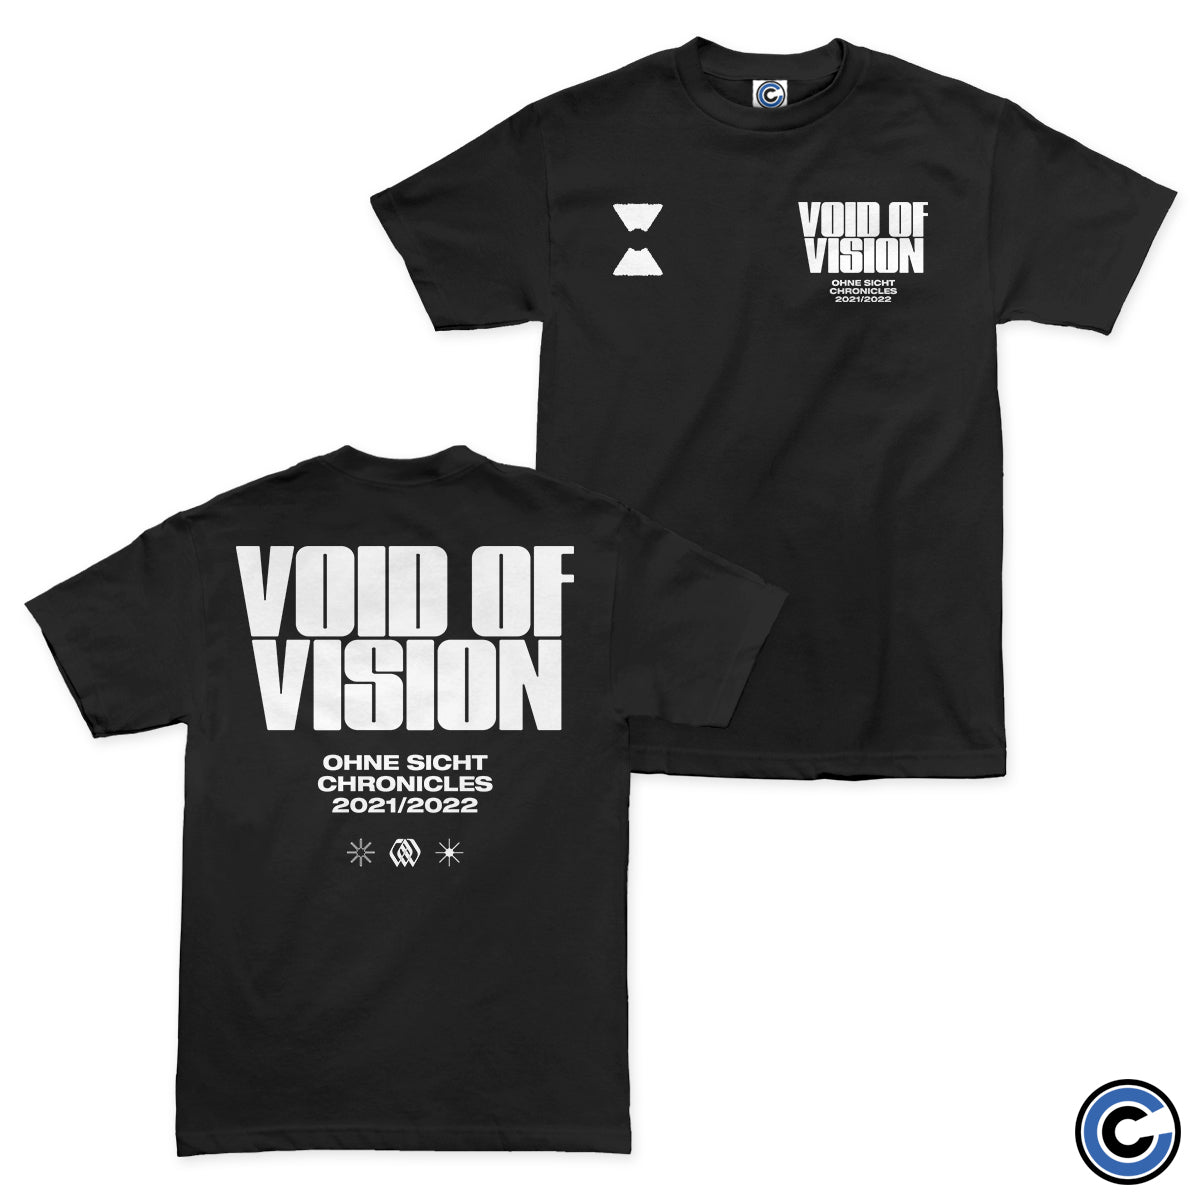 Void of Vision "Hourglass" Shirt